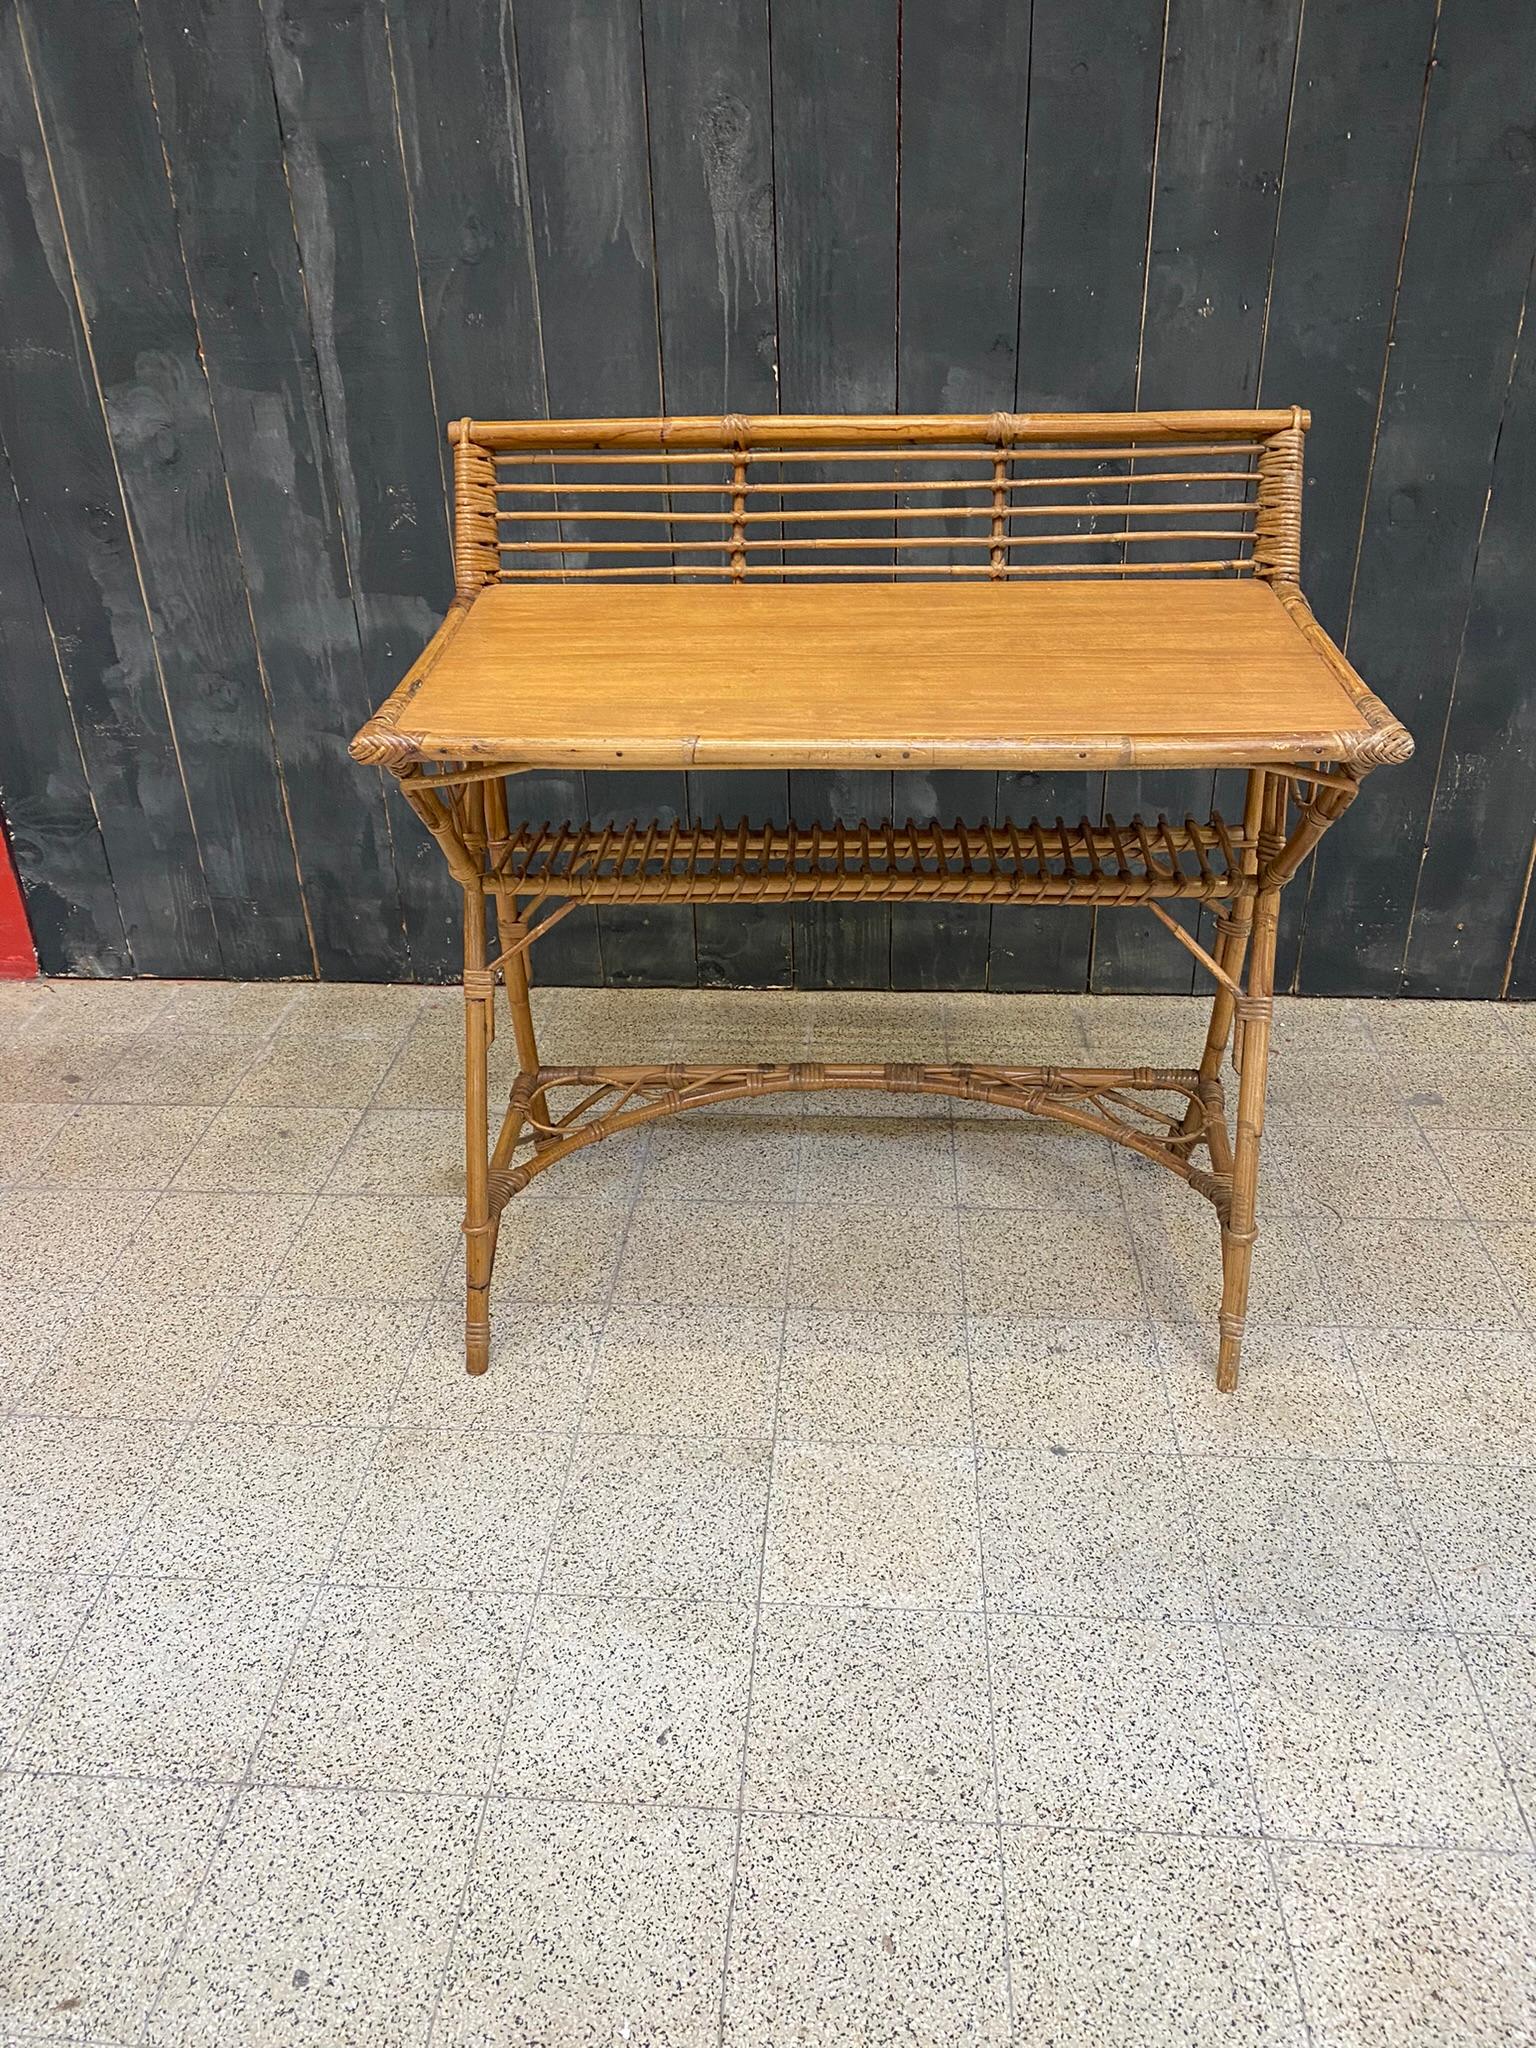 Charming little desk or console in bamboo and wood in the style of Louis Sognot circa 1950/1960.